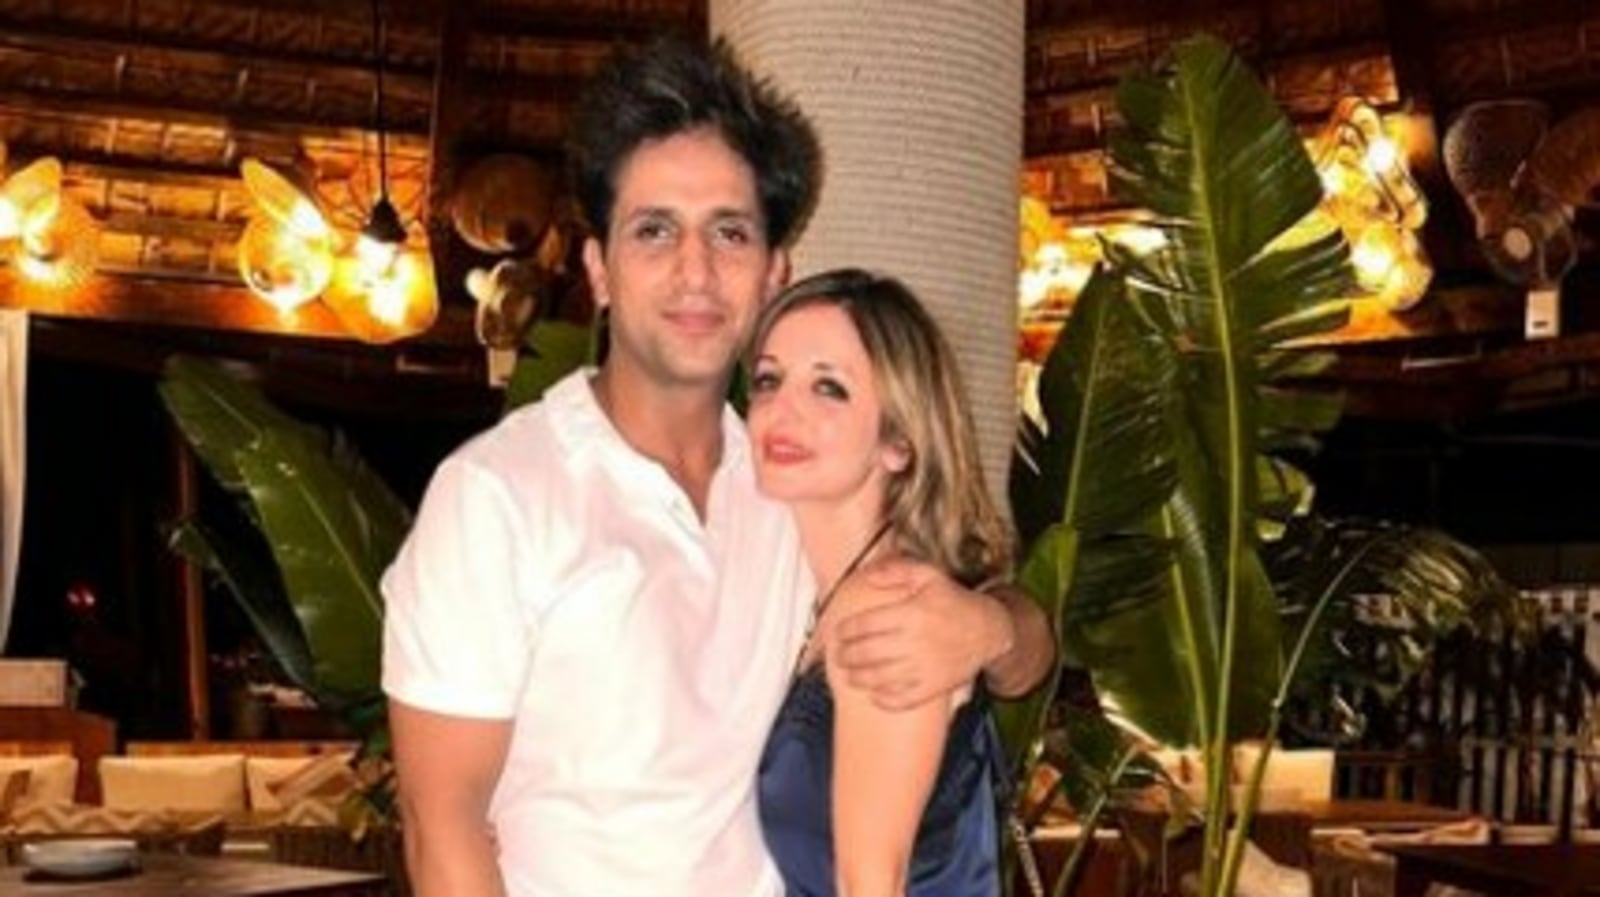 Sussanne Khan shares loved up pic with BF Arslan Goni, calls it ‘incredible’